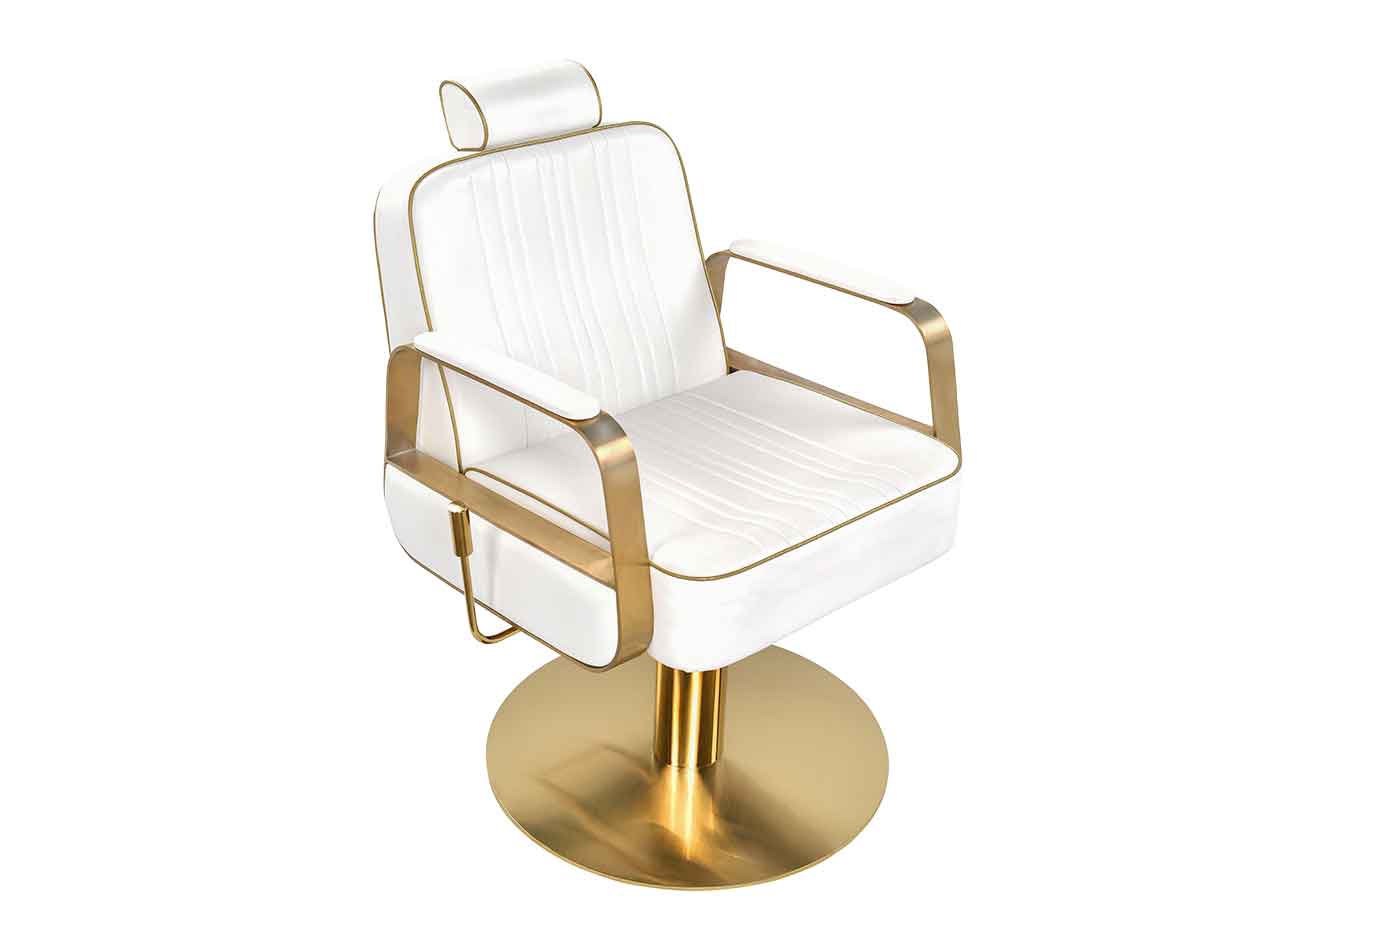 The Osaka Golden Chair by Marc for comfort